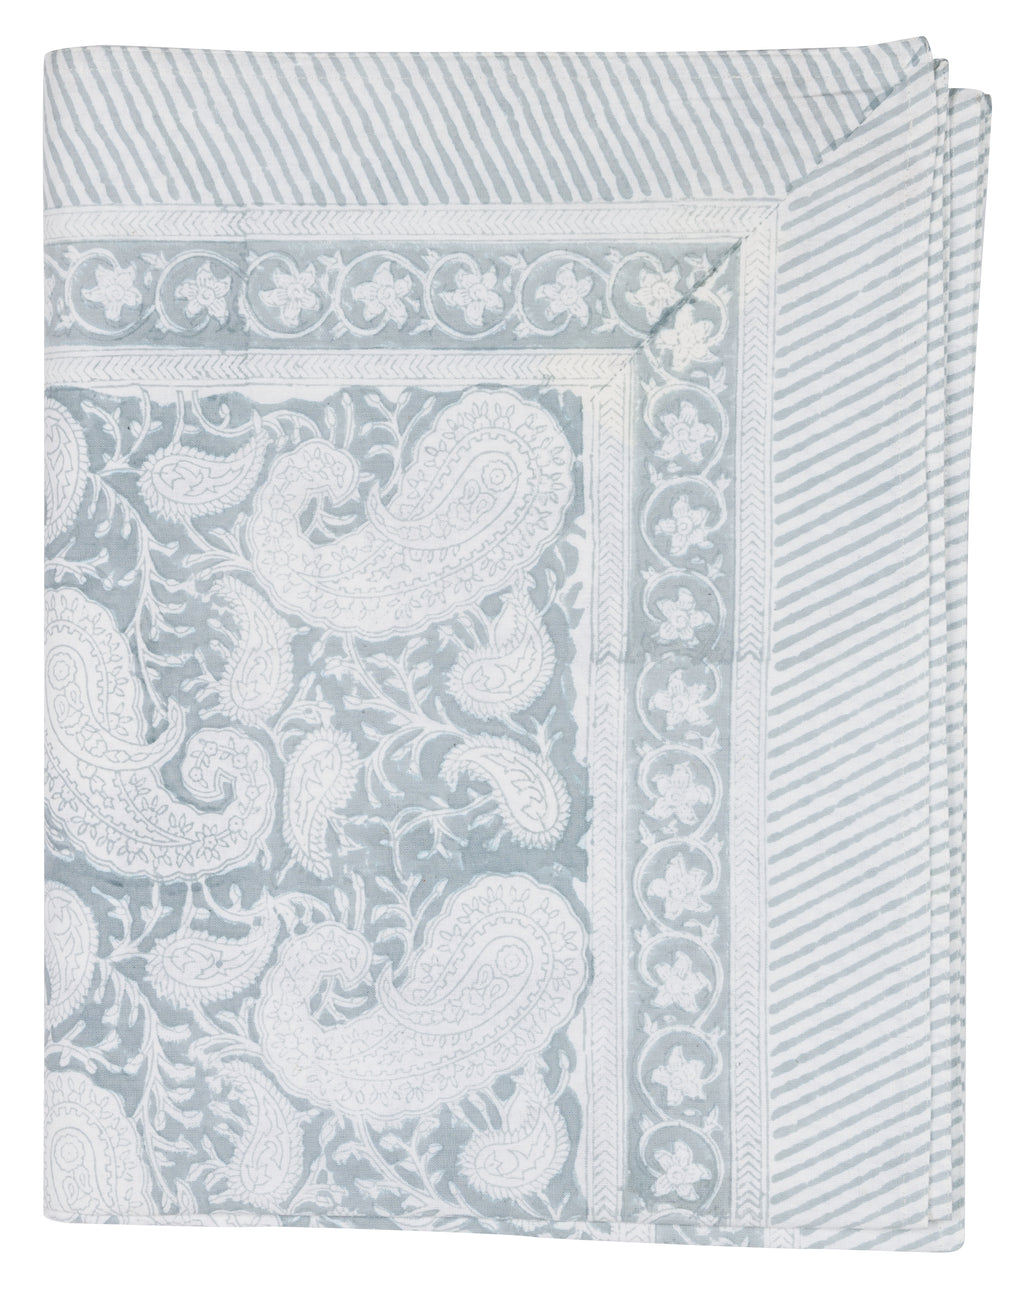 Tablecloth with Big Paisley® print in Cashmere Blue